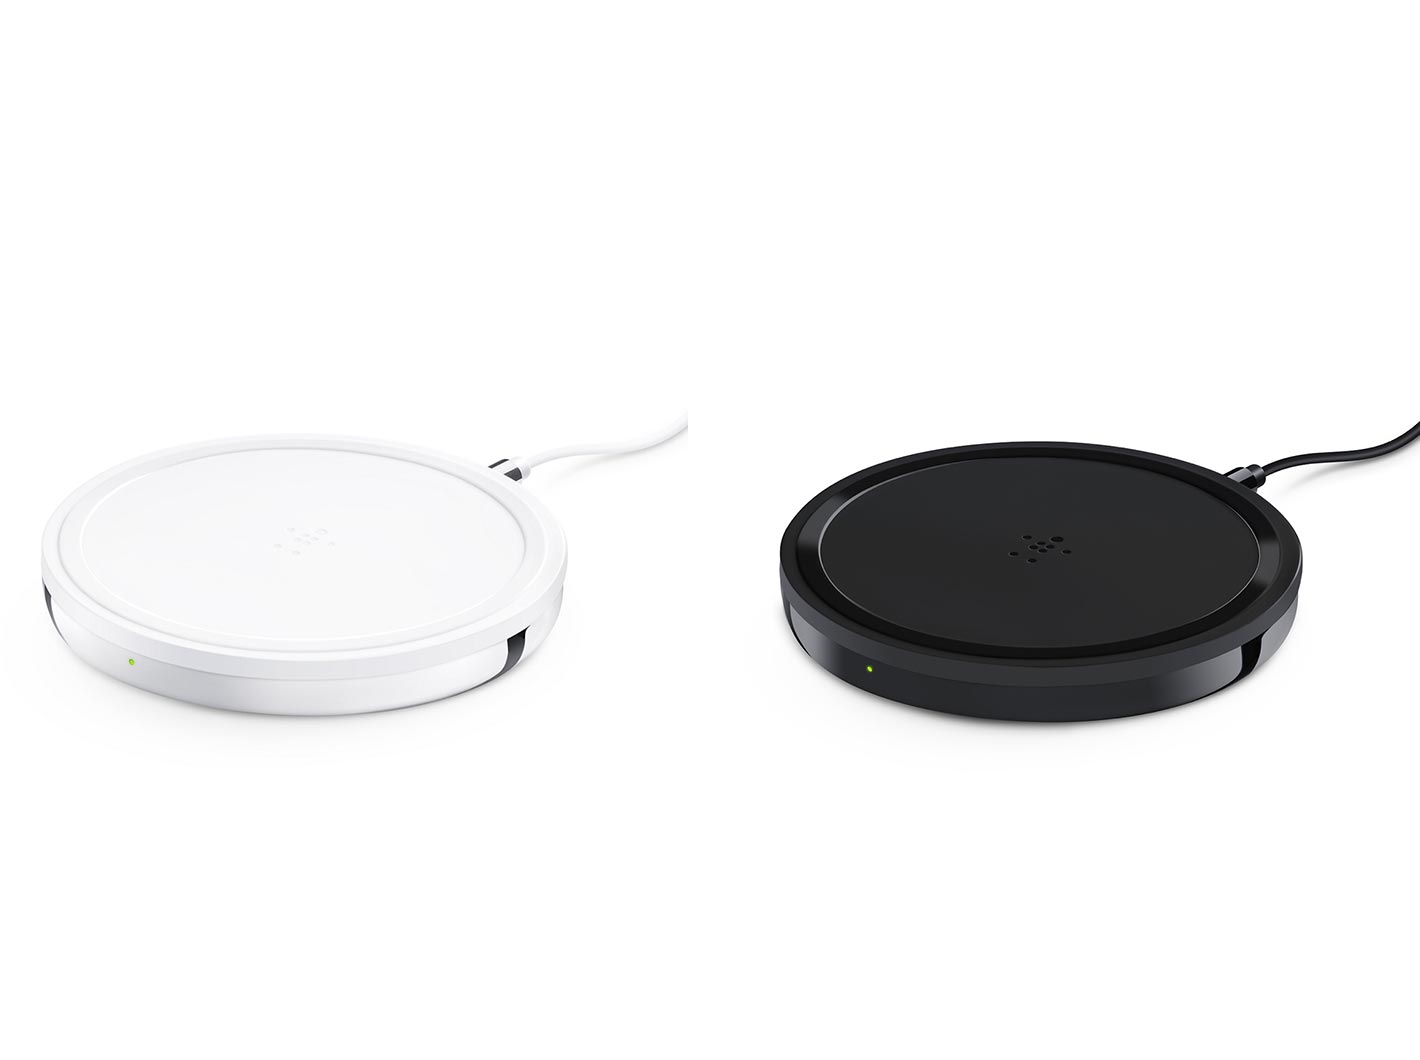 Apple Store、ワイヤレス充電器「Belkin Boost Up Special Edition Wireless Charging Pad」を1,500円値下げ